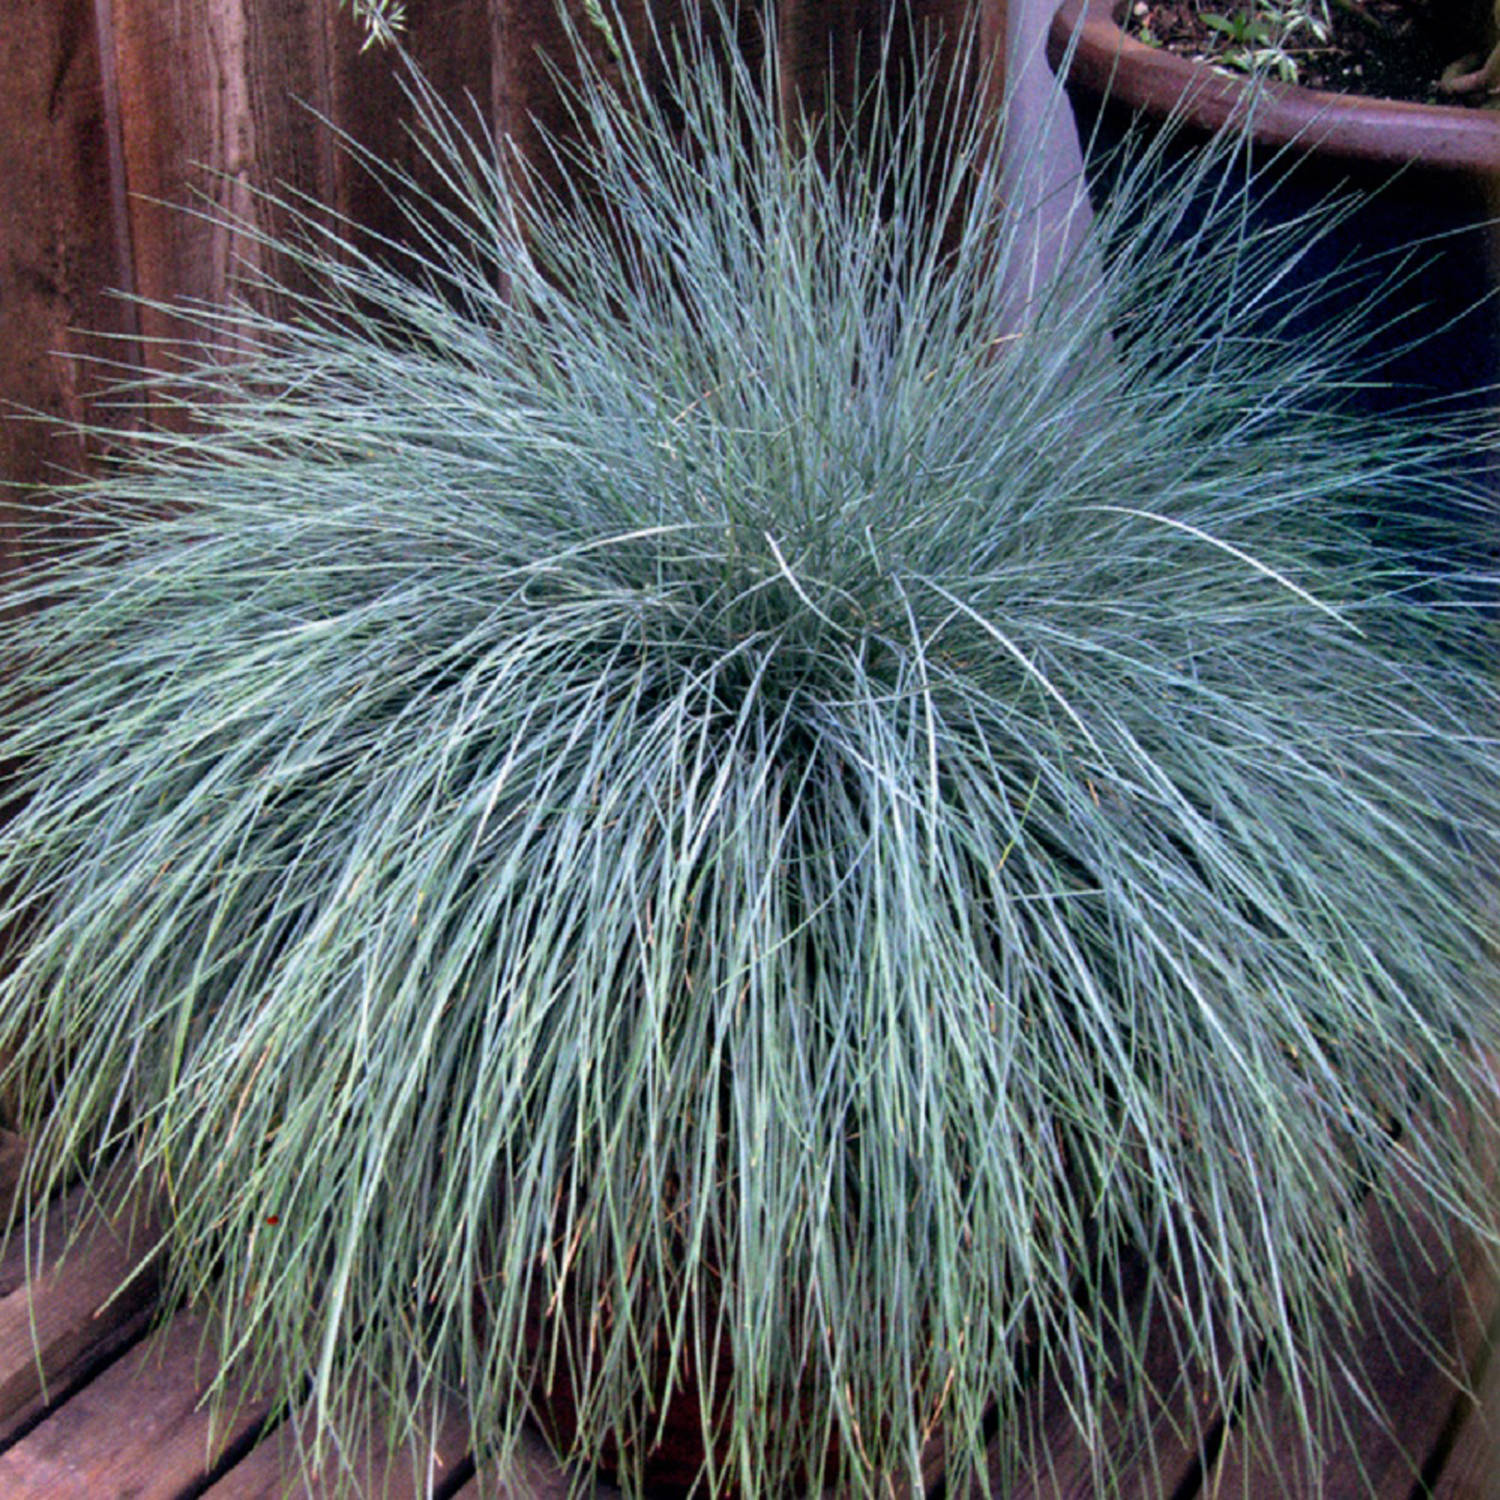 Beyond Blue Festuca (2.5 Quart) Ornamental Perennial Fescue Grass with Powder Blue Foliage - Full Sun Live Outdoor Plant - Southern Living Plant Collection - image 1 of 5